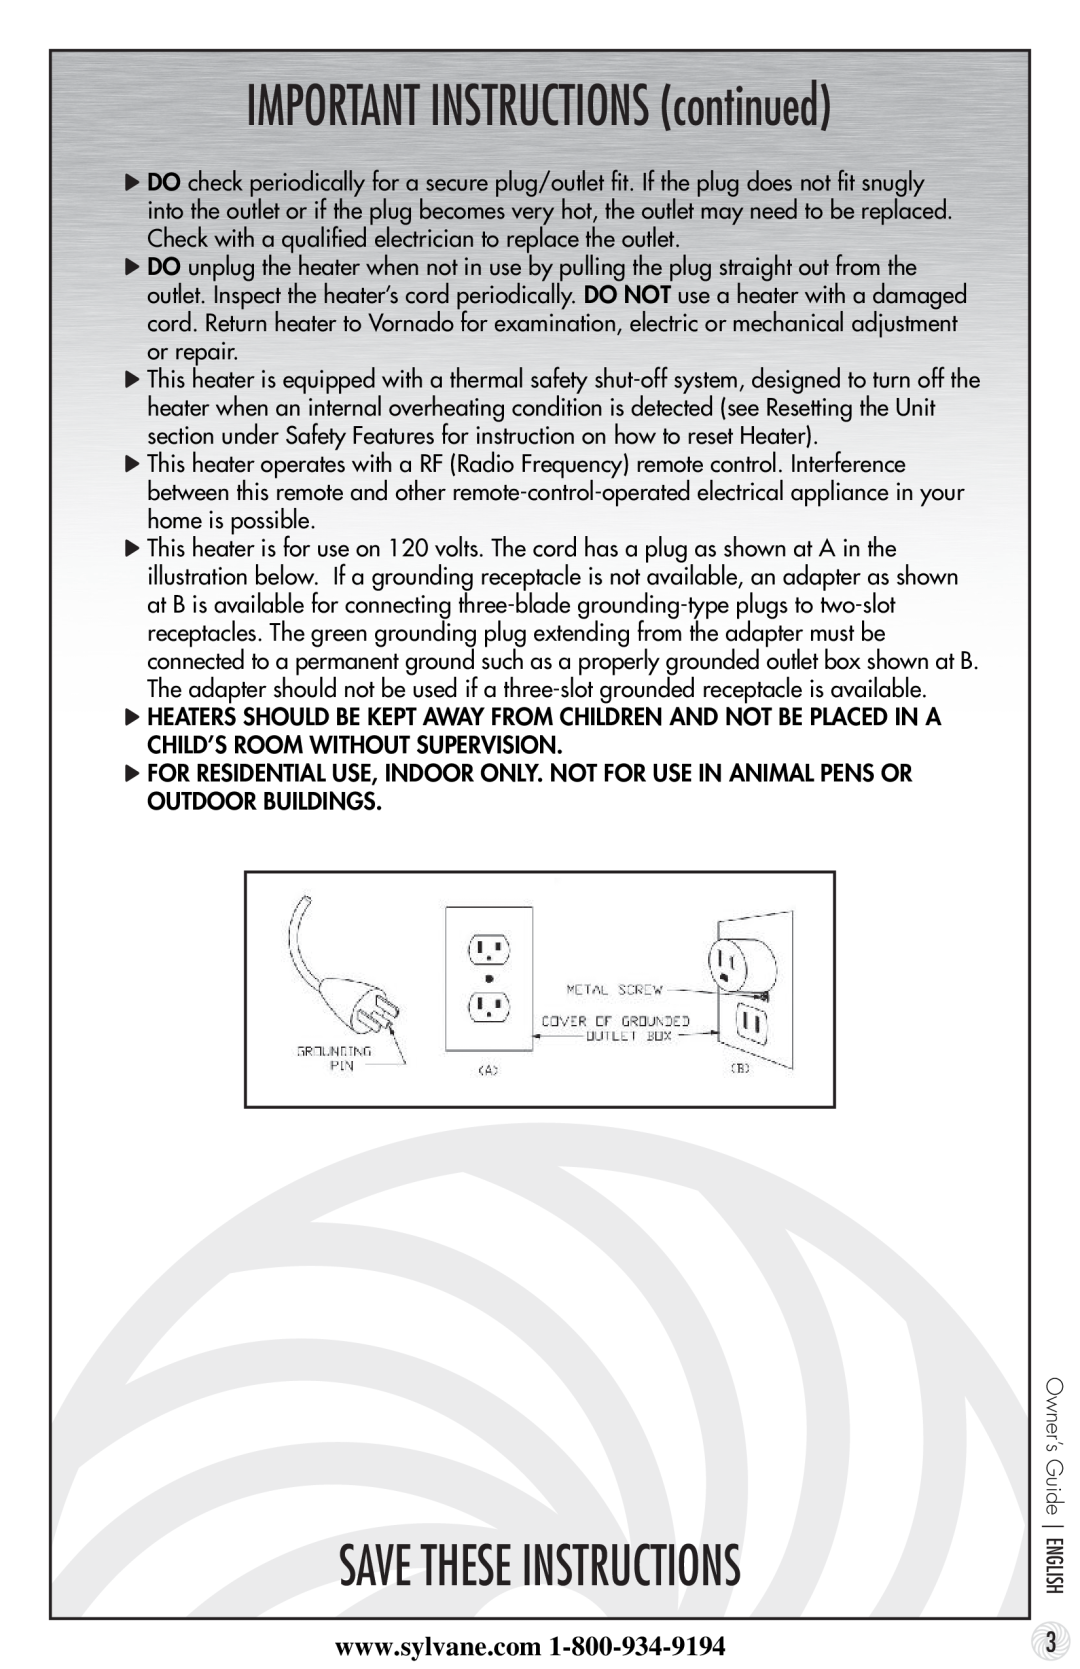 Vornado 600 manual Save These Instructions, IMPORTANT INSTRUCTIONS continued 